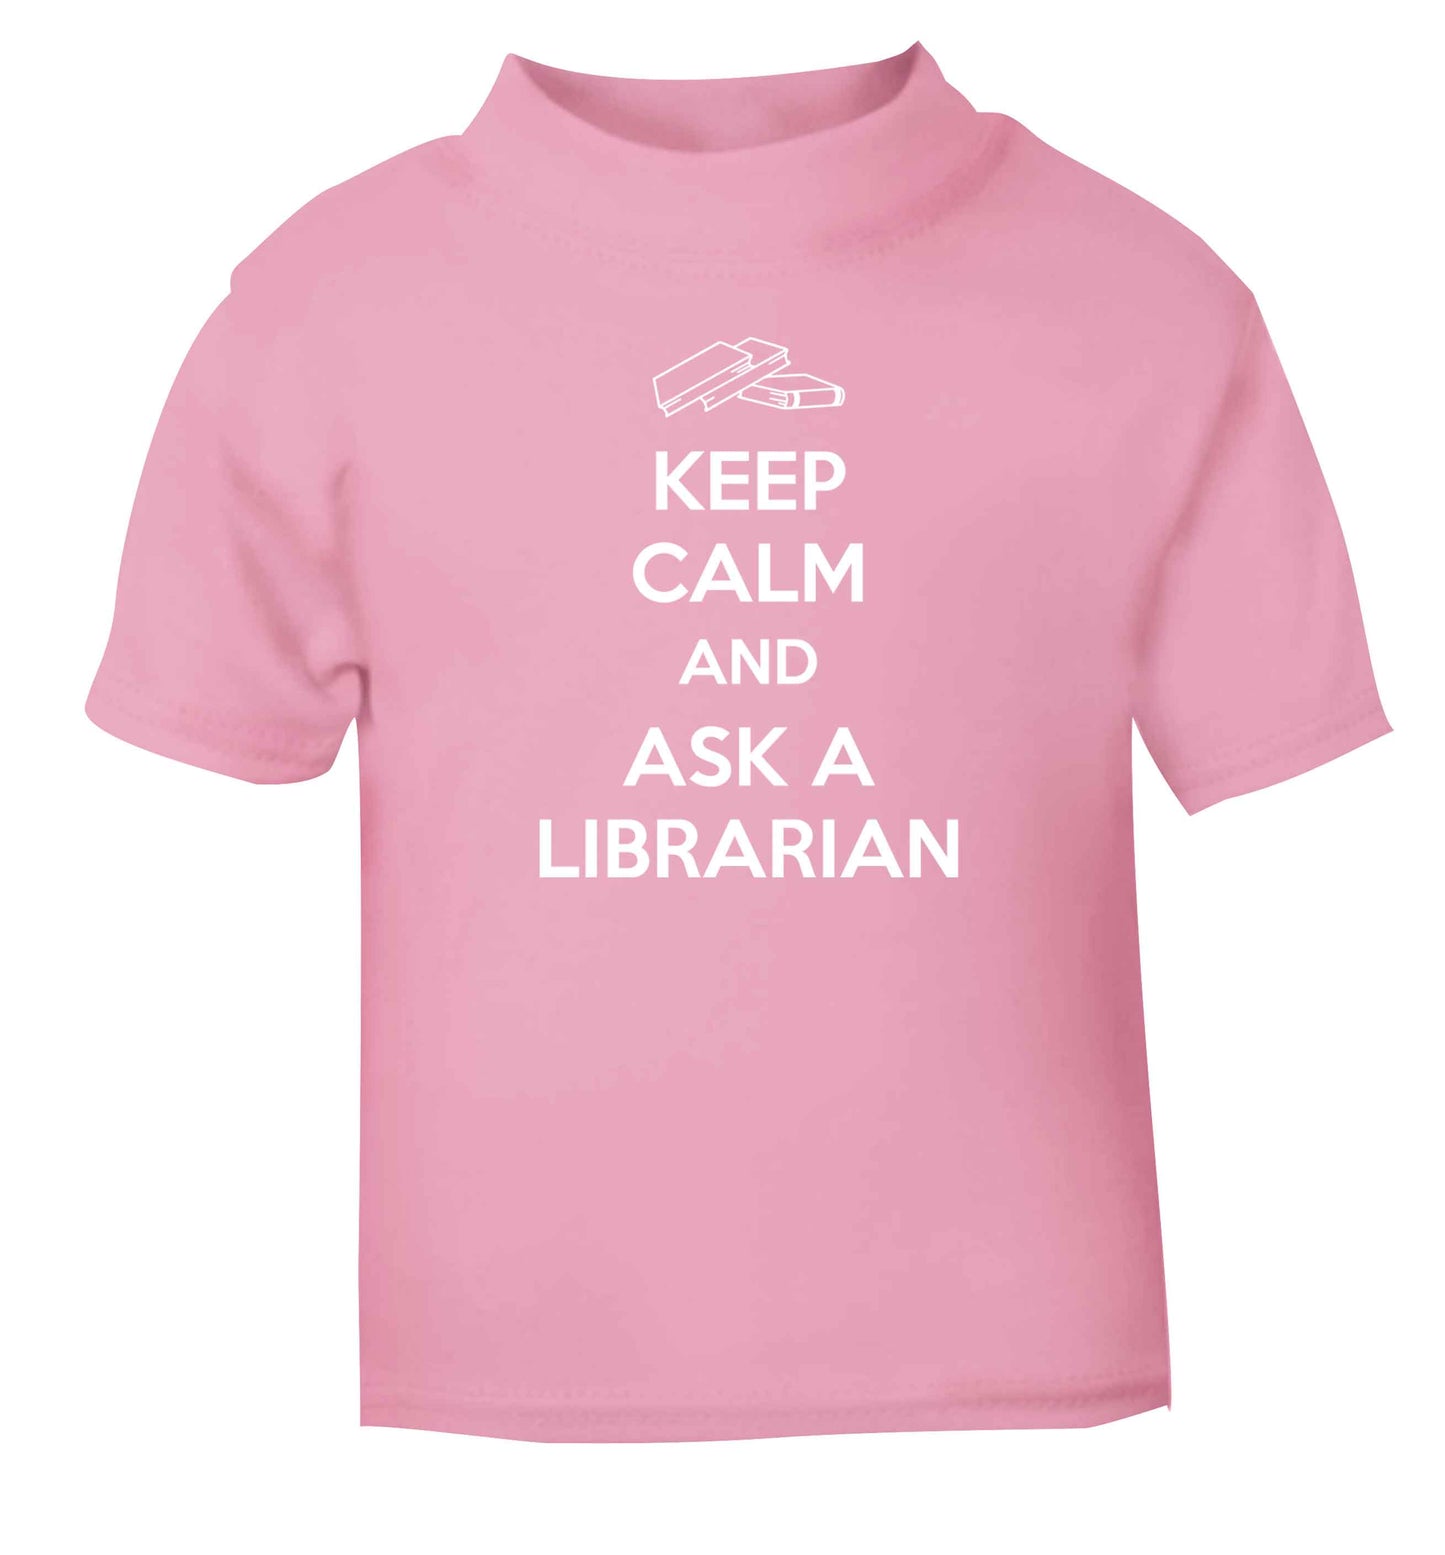 Keep calm and ask a librarian light pink Baby Toddler Tshirt 2 Years